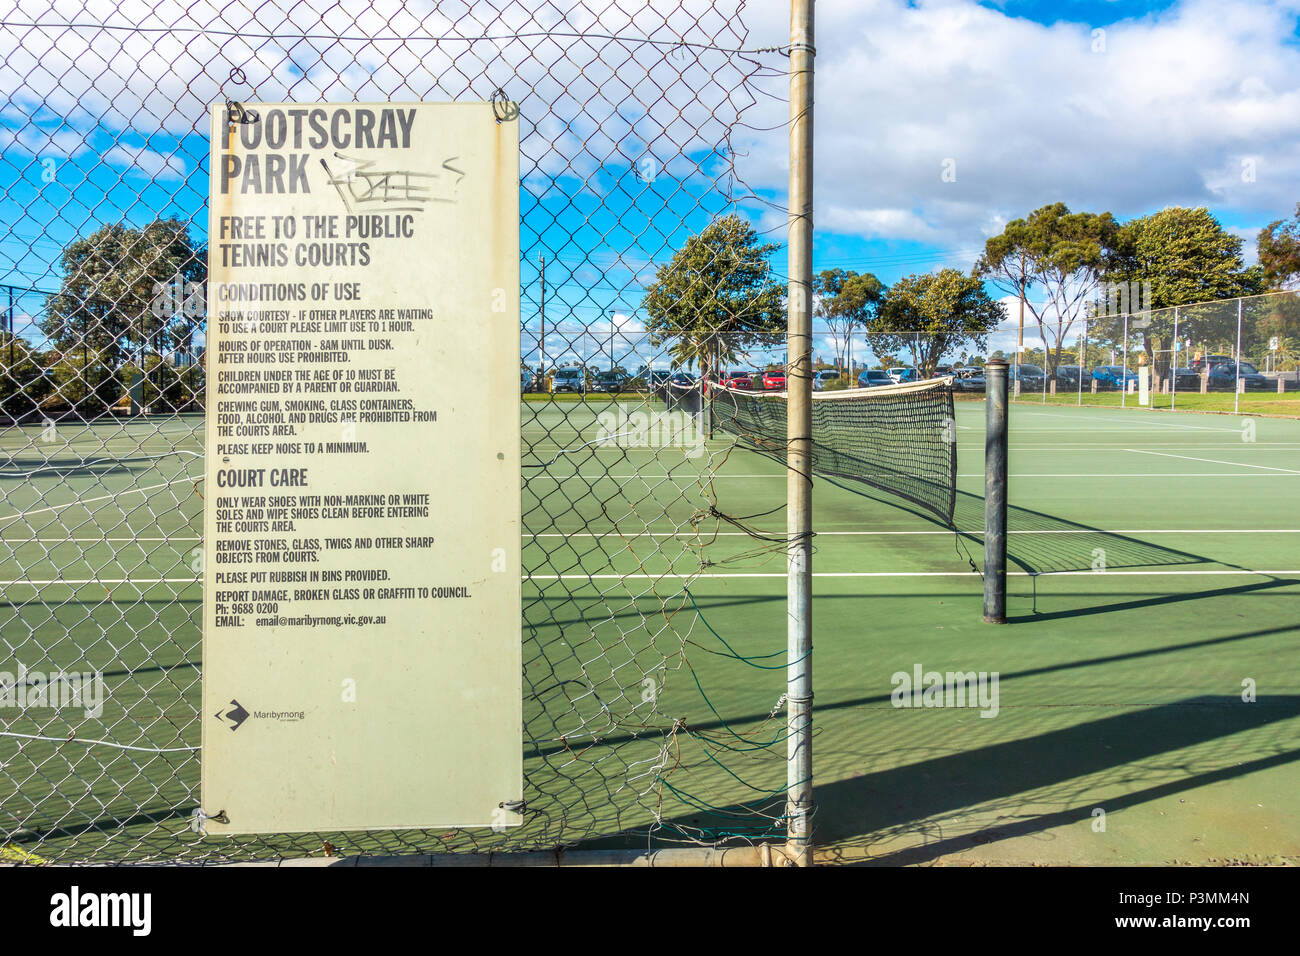 Entrance of free tennis court in Footscray Park. Melbourne, VIC Australia Stock Photo